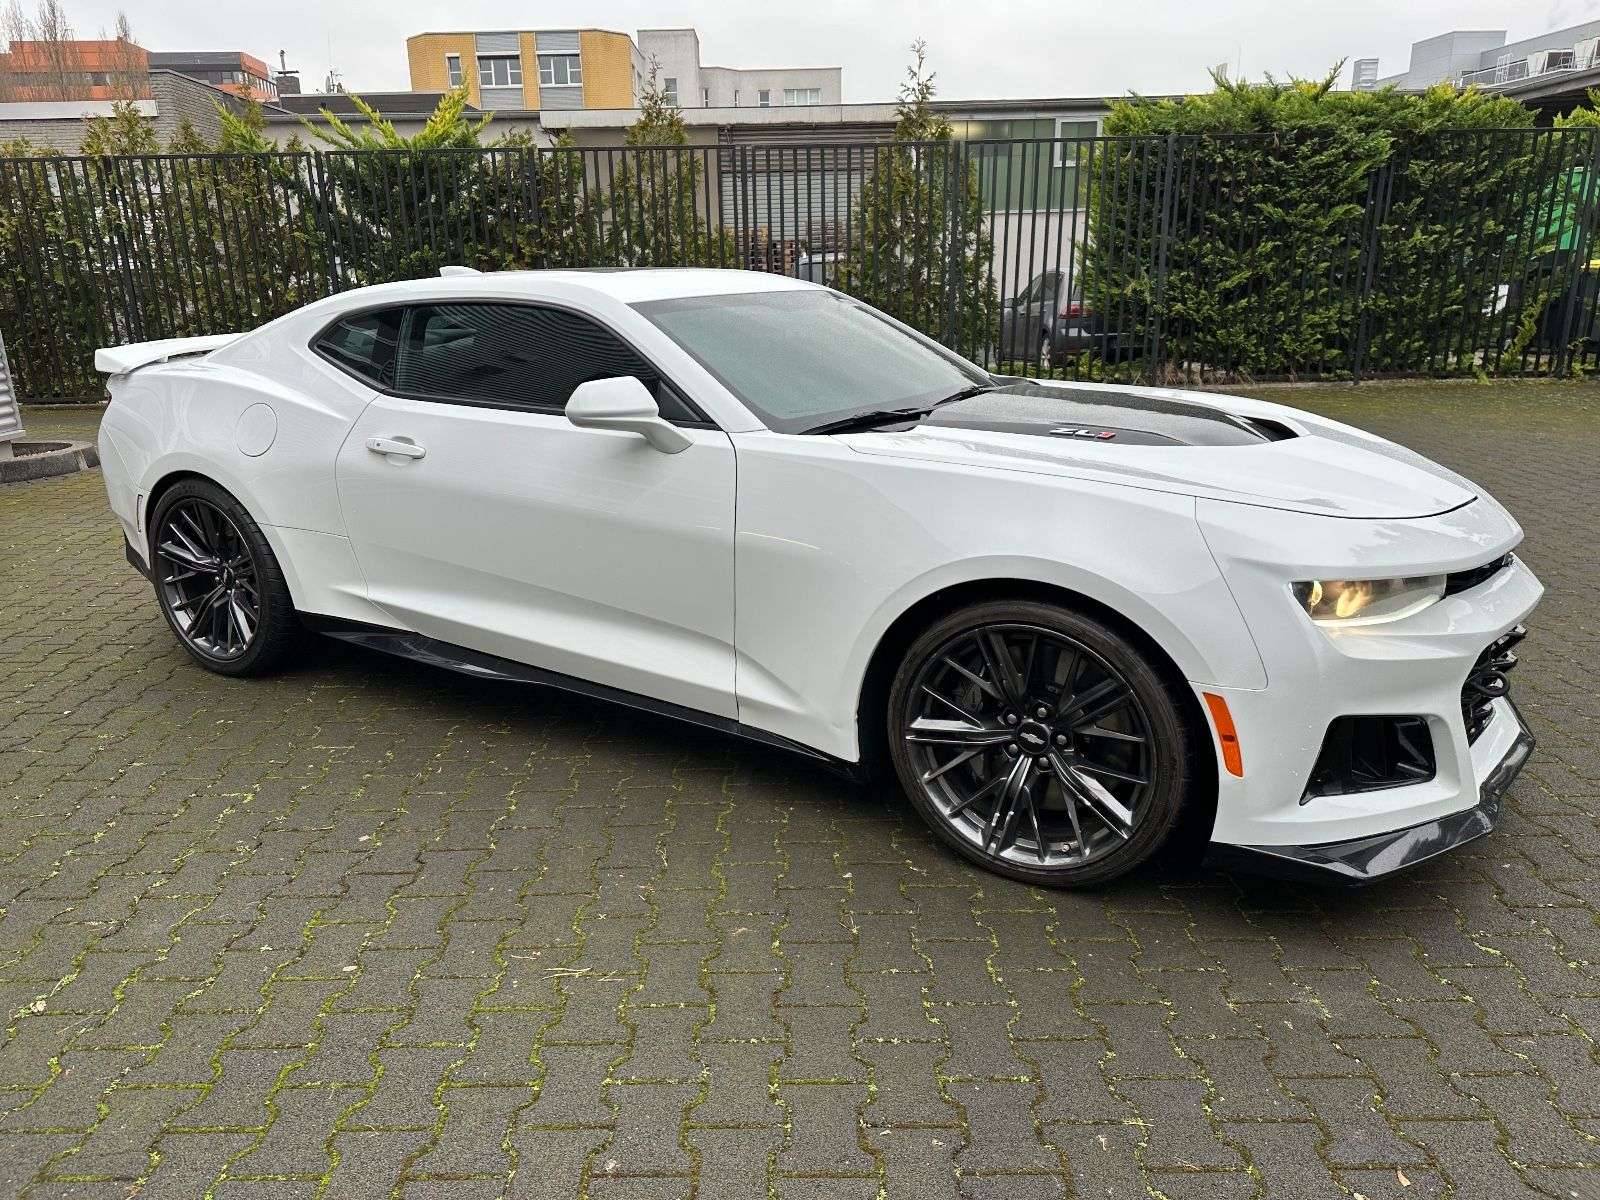 For Sale: Chevrolet Camaro ZL1 (2017) offered for £48,544